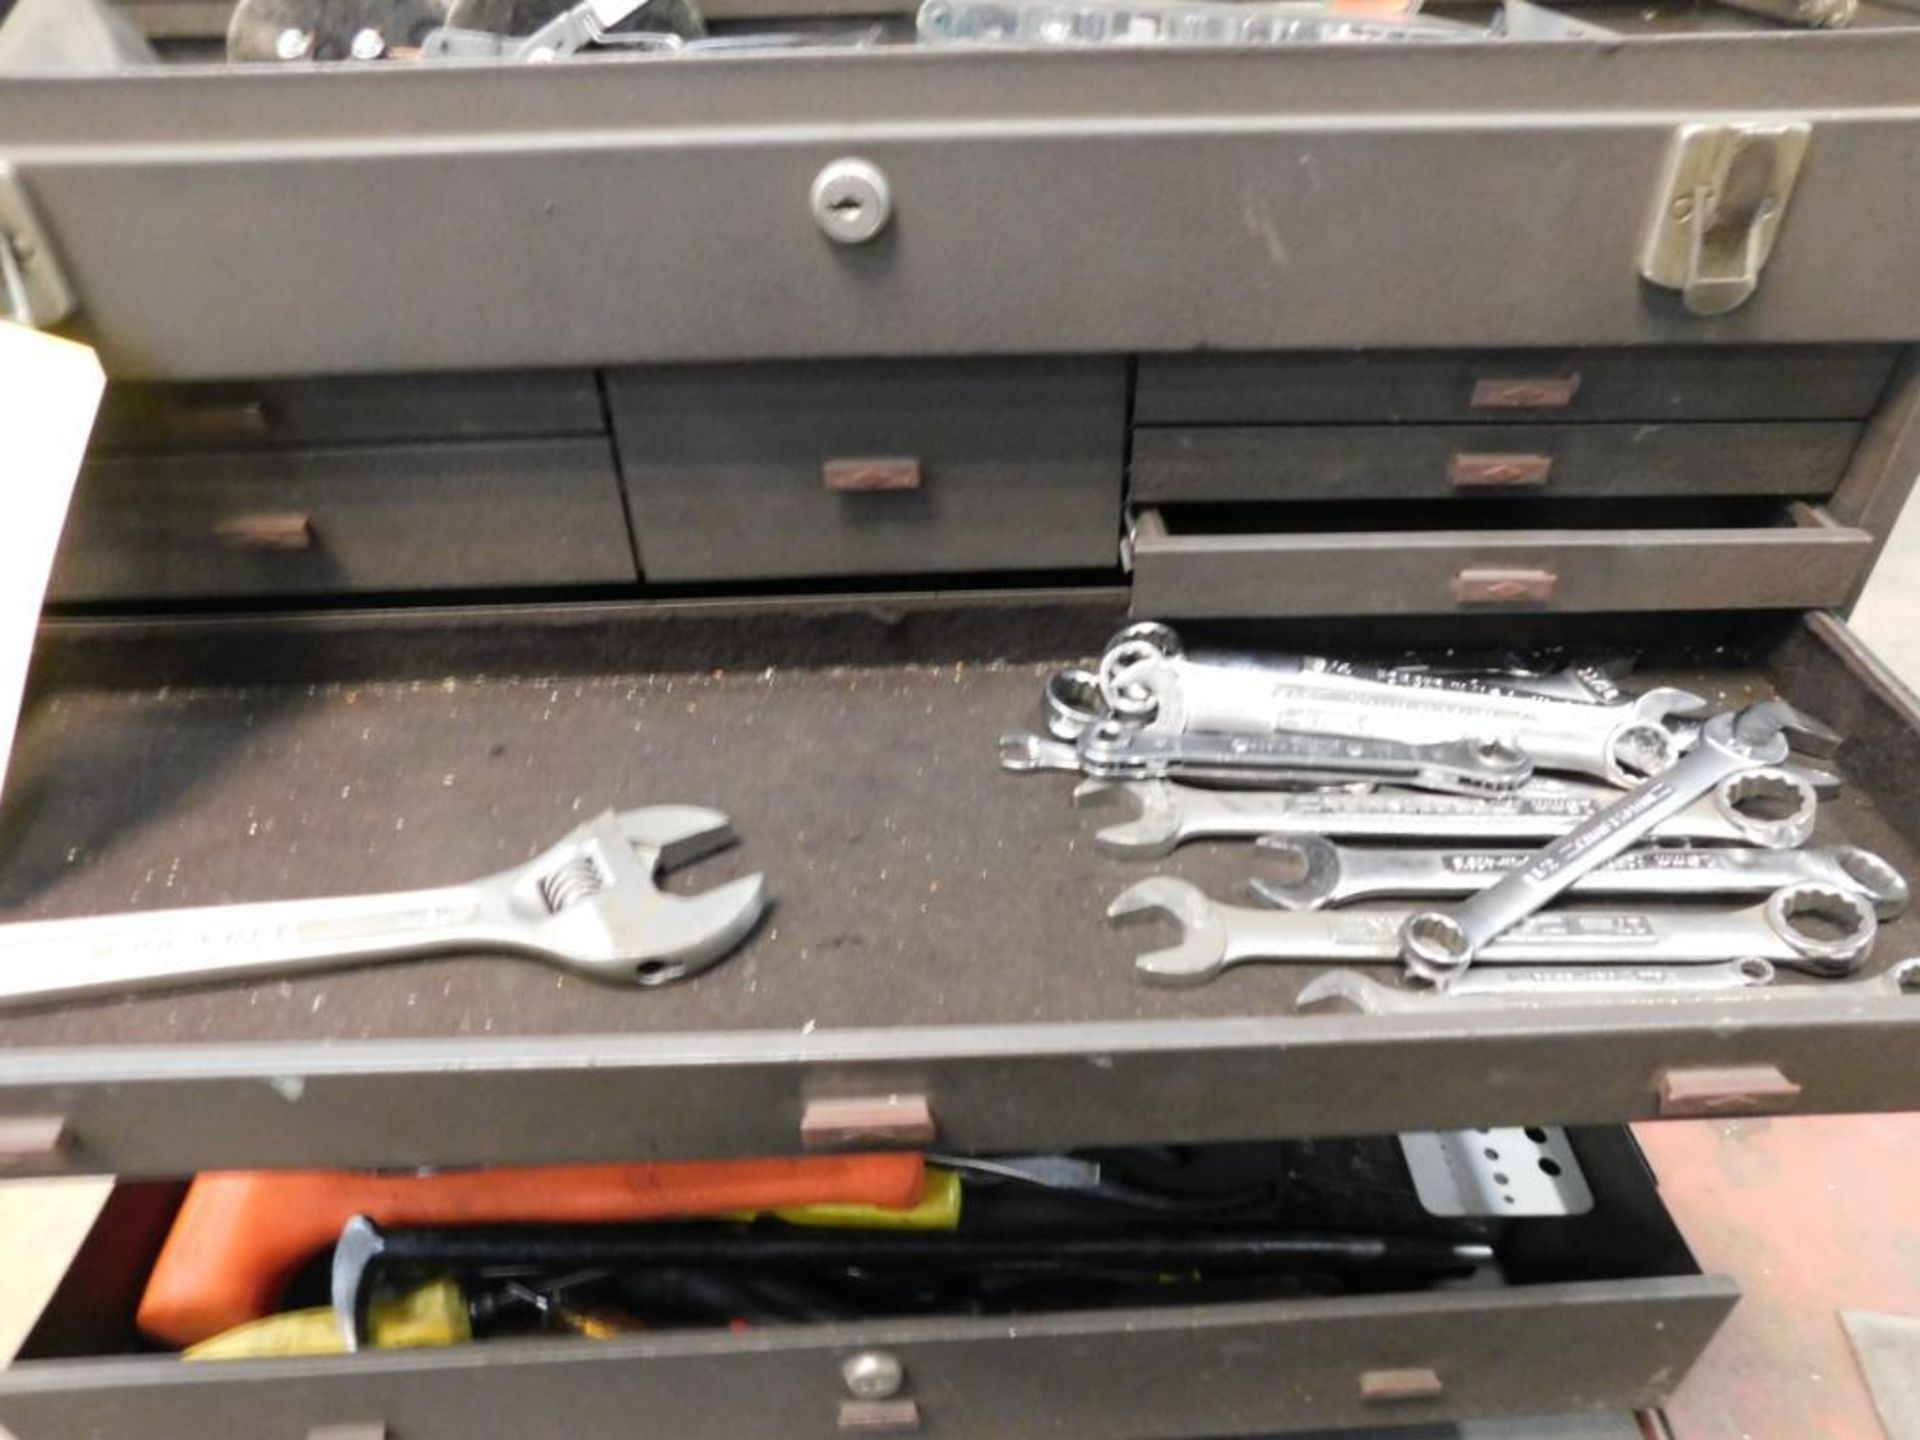 LOT: Portable 7-Drawer Tool Chest with Contents of Screw Drivers, Sockets, Wrenches, Hammers, - Image 2 of 5